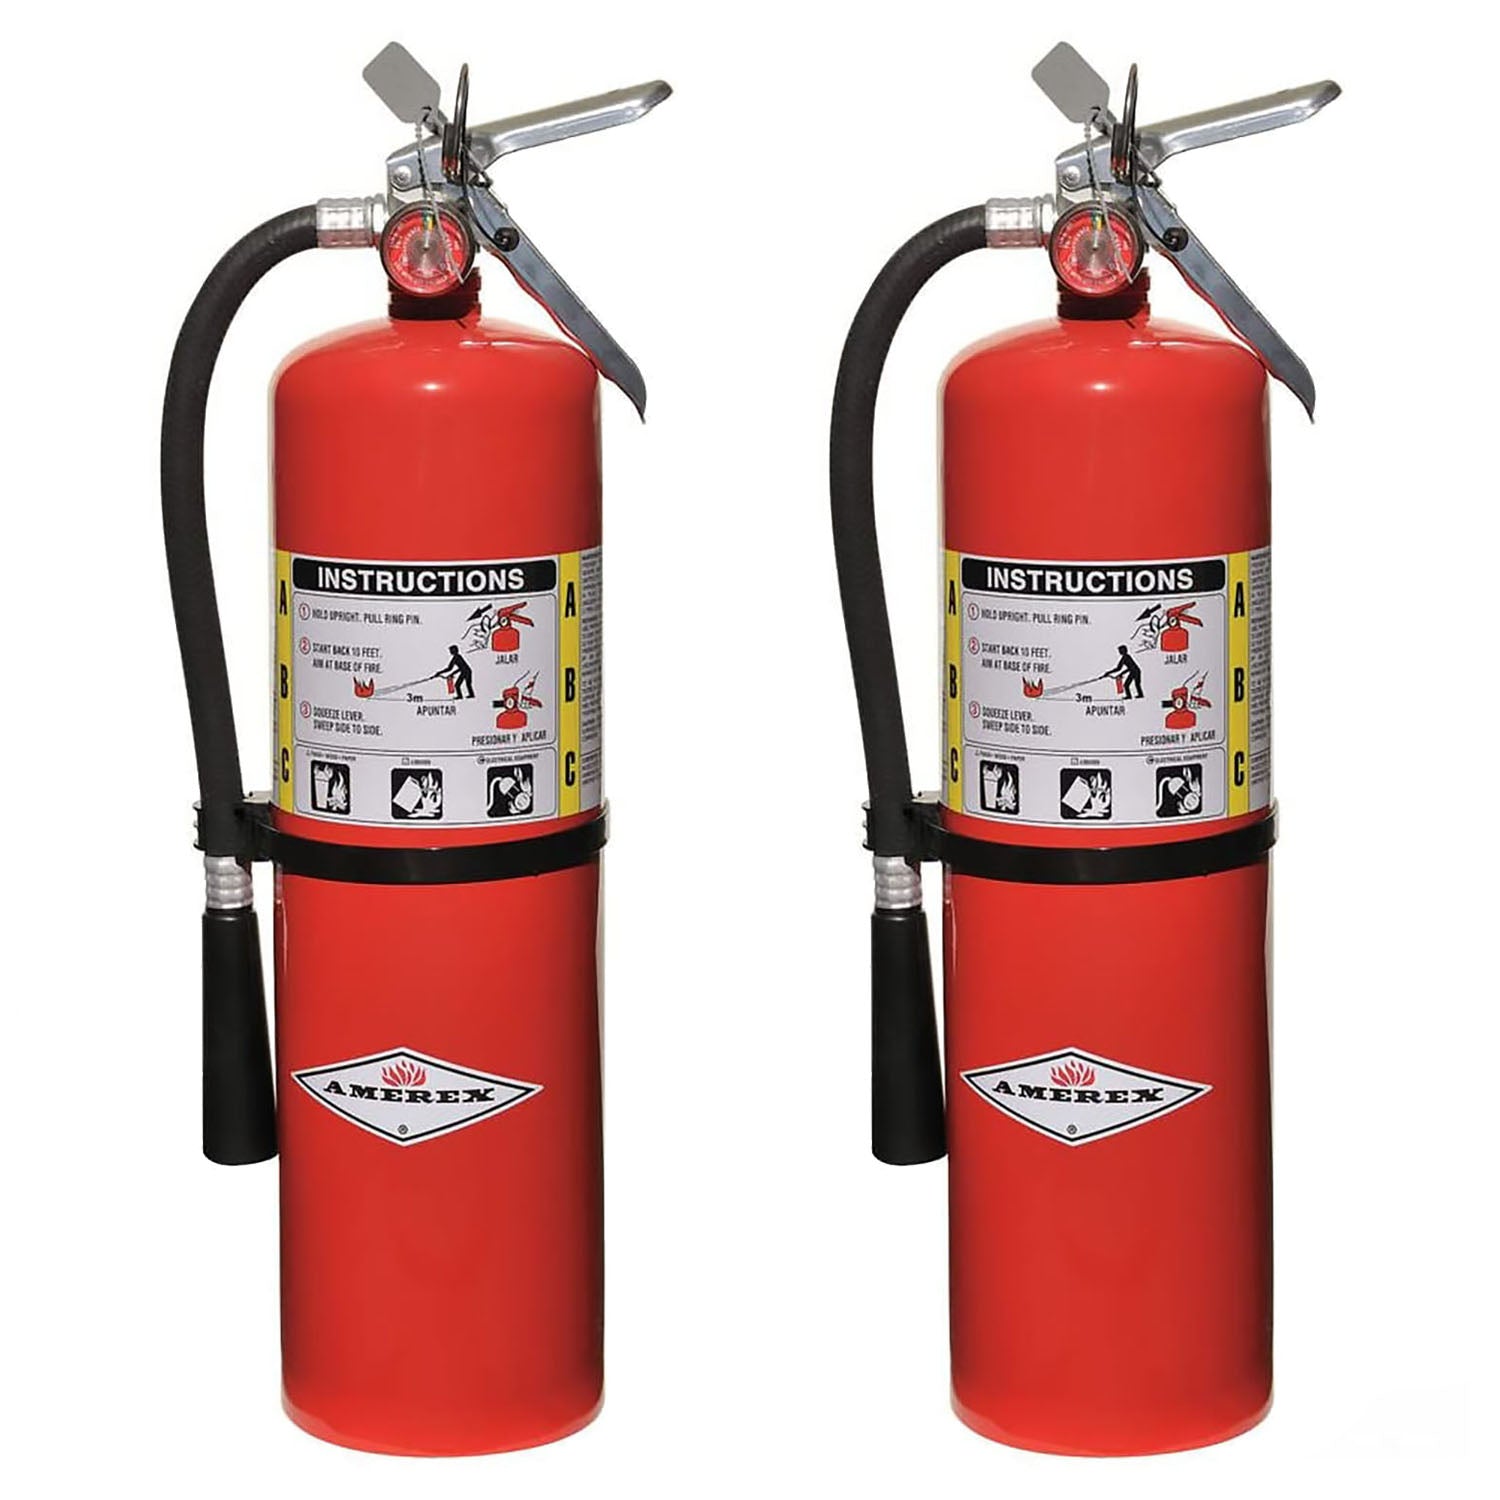 Amerex B456 ABC Dry Chemical Fire Extinguisher with Aluminum Valve, 10 lb - 2 Pack - Pro-Distributing